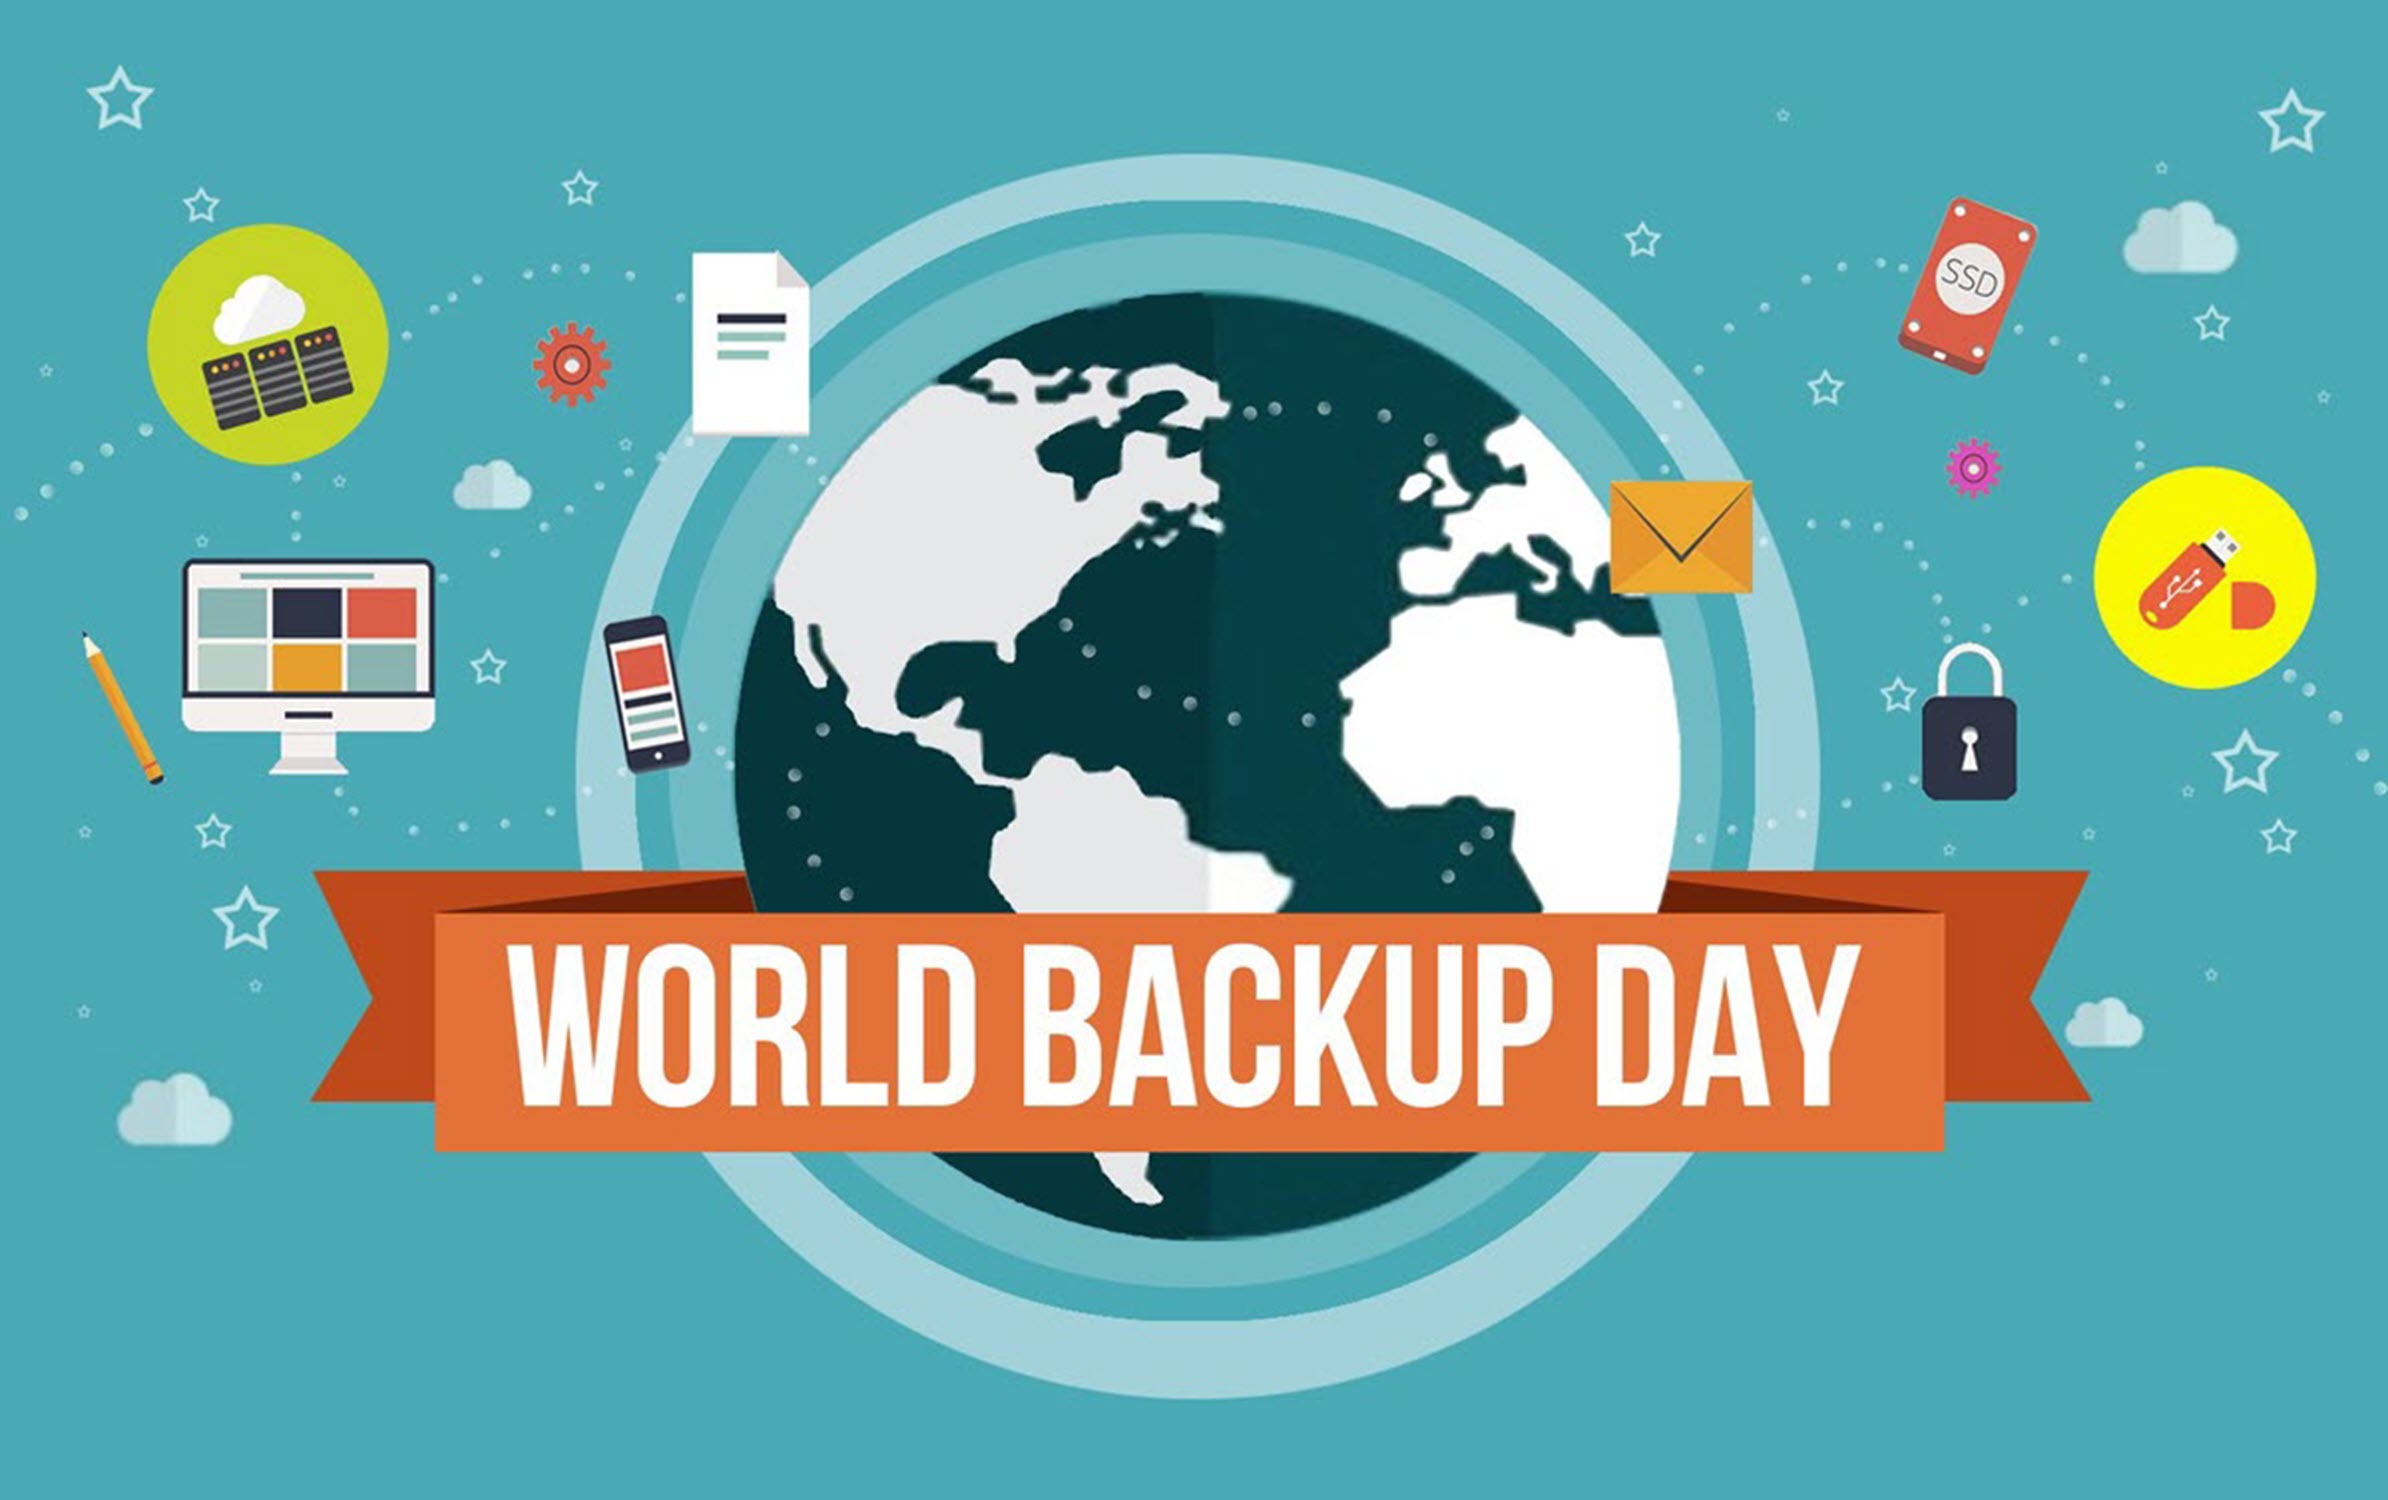 Today is World Backup Day and let me ask you this: when was the last time you backed up your genealogy data?